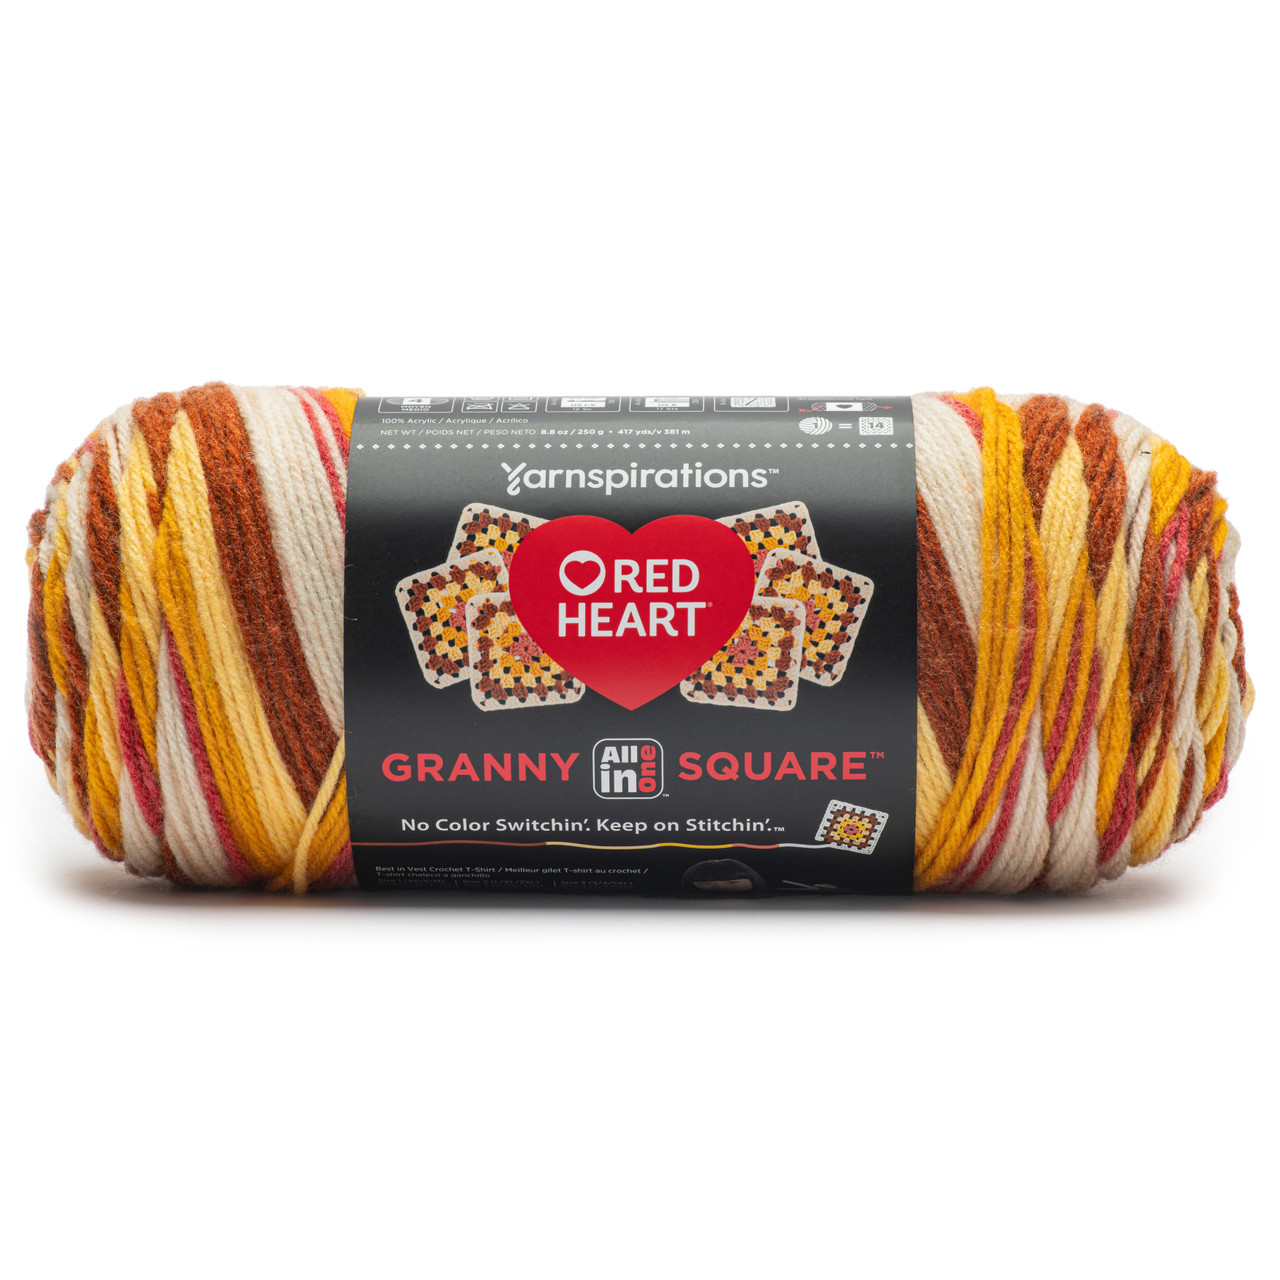 Red Heart All In One Granny Square Yarn (250g/8.8oz), Yarnspirations